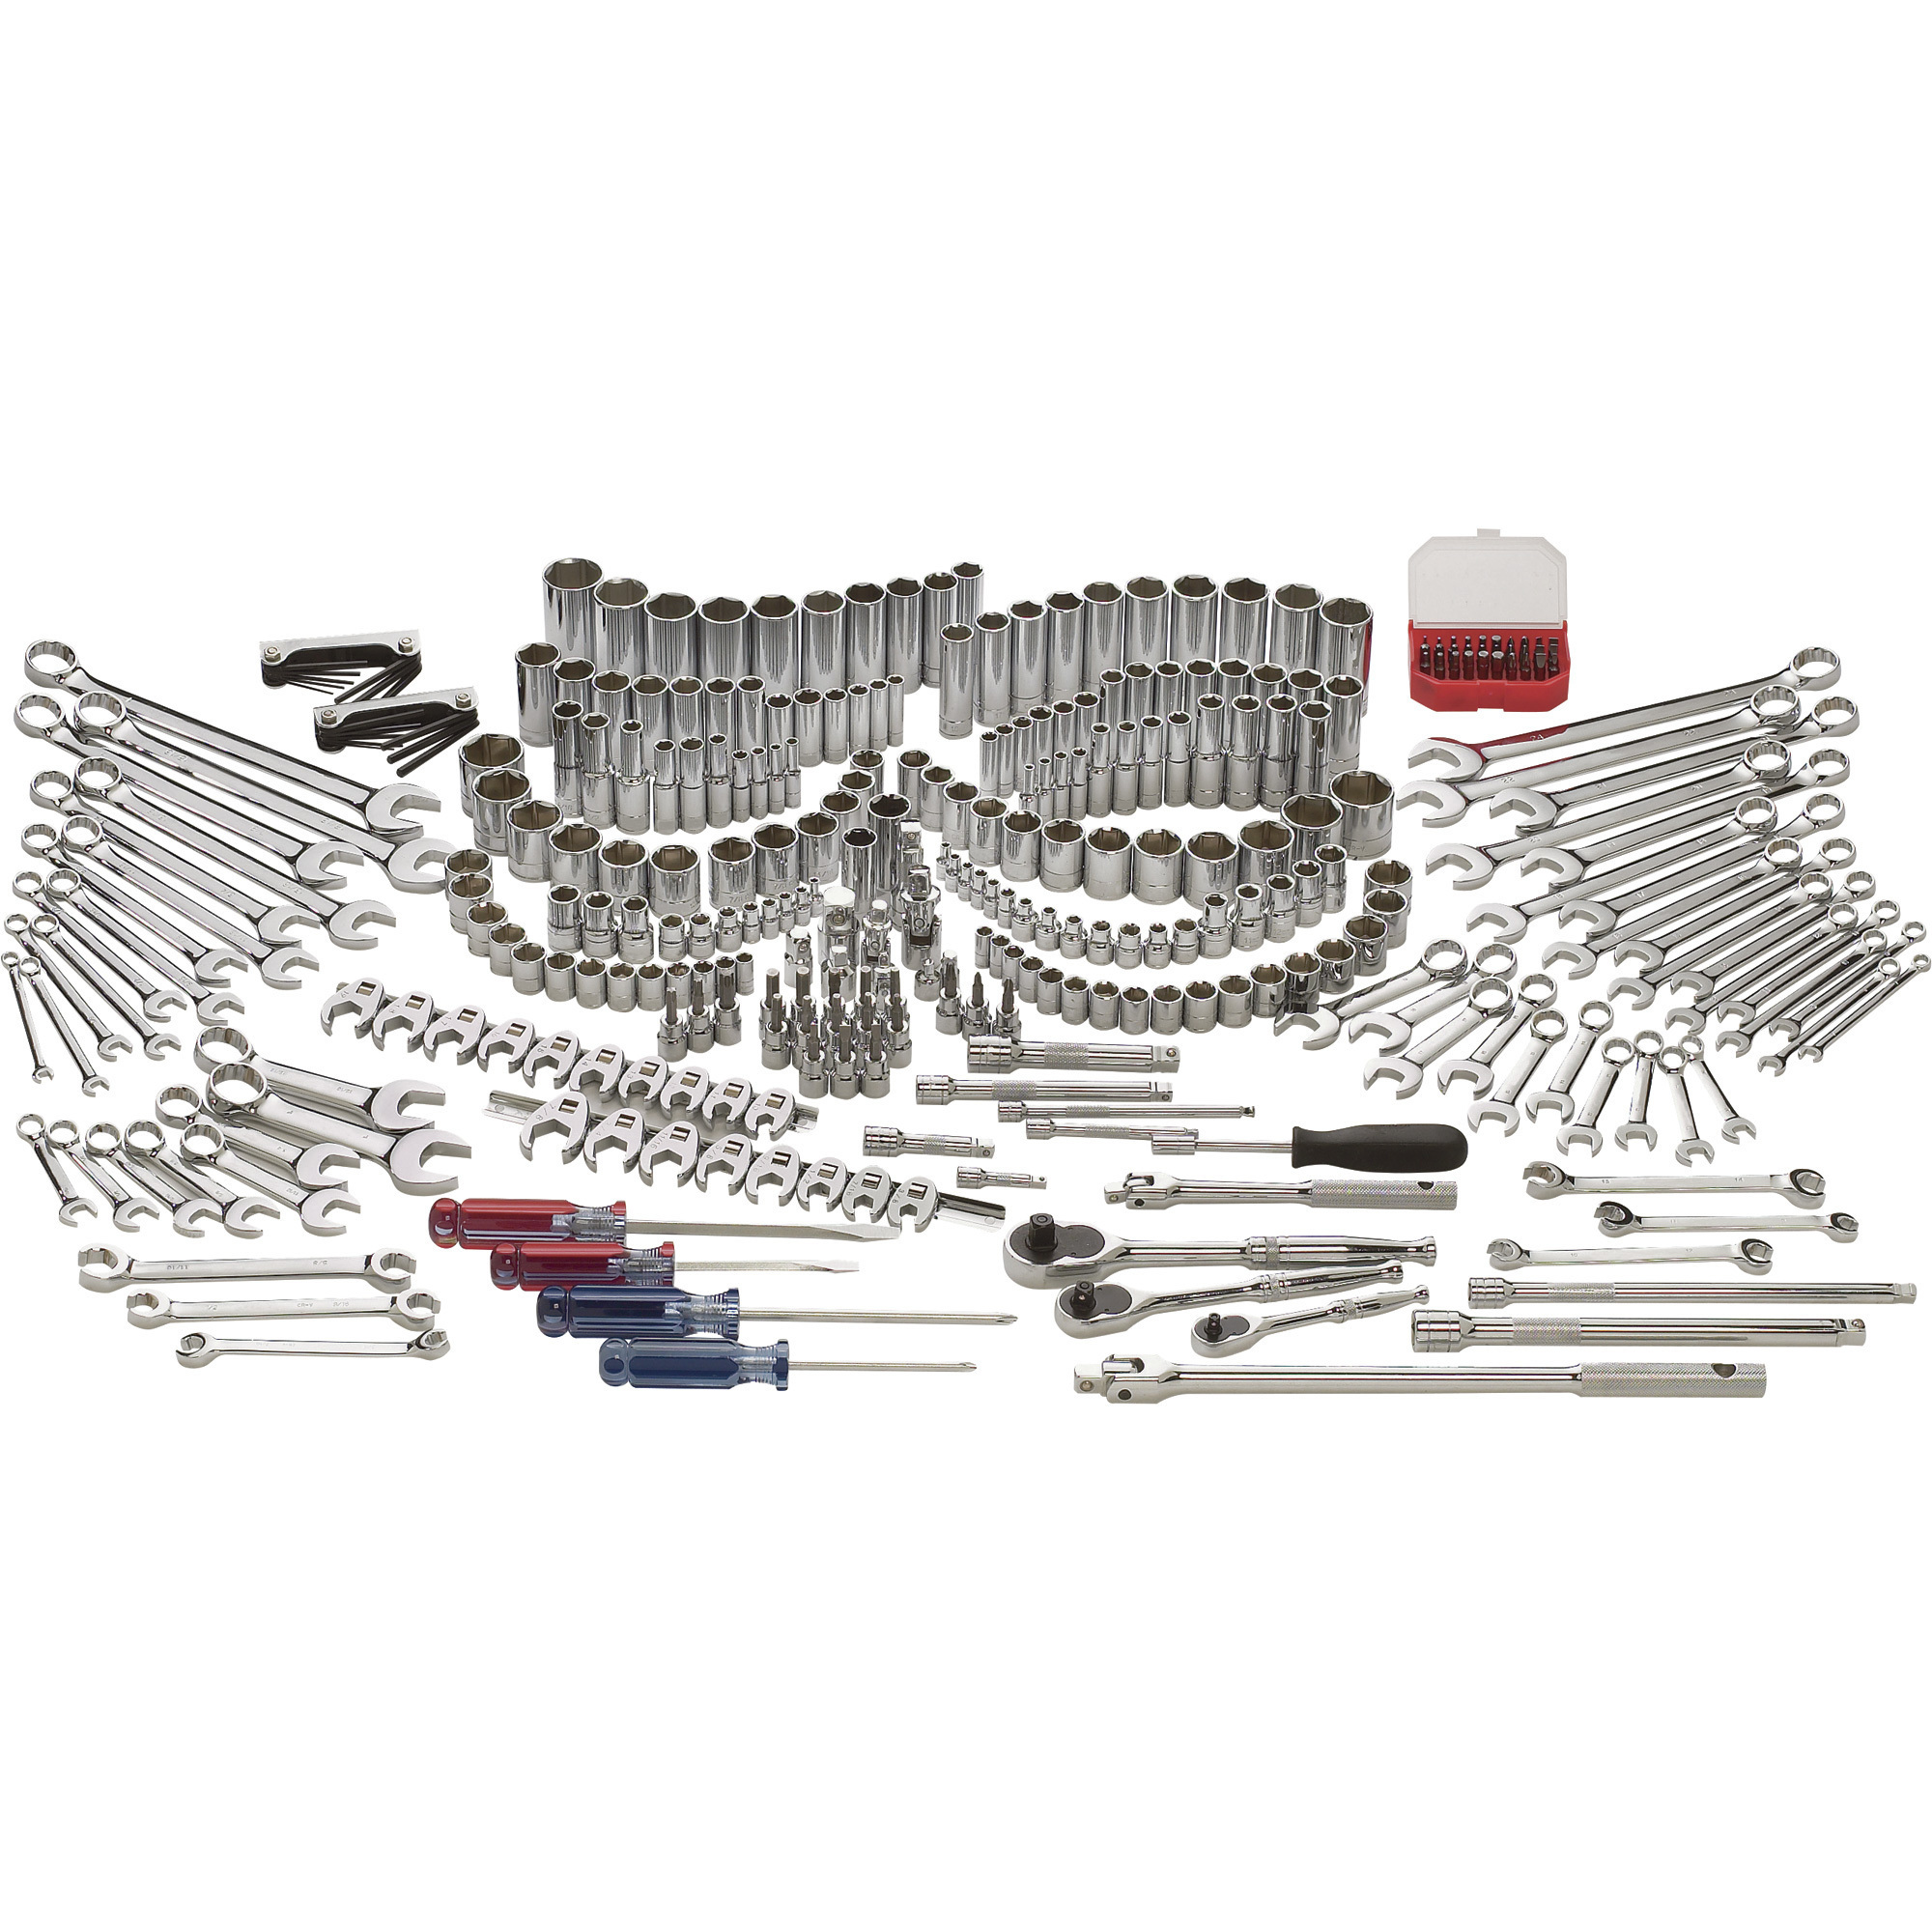 Klutch Mechanic's Tool Set, 305-Piece, 1/4Inch, 3/8Inch and 1/2Inch Drive, SAE and Metric